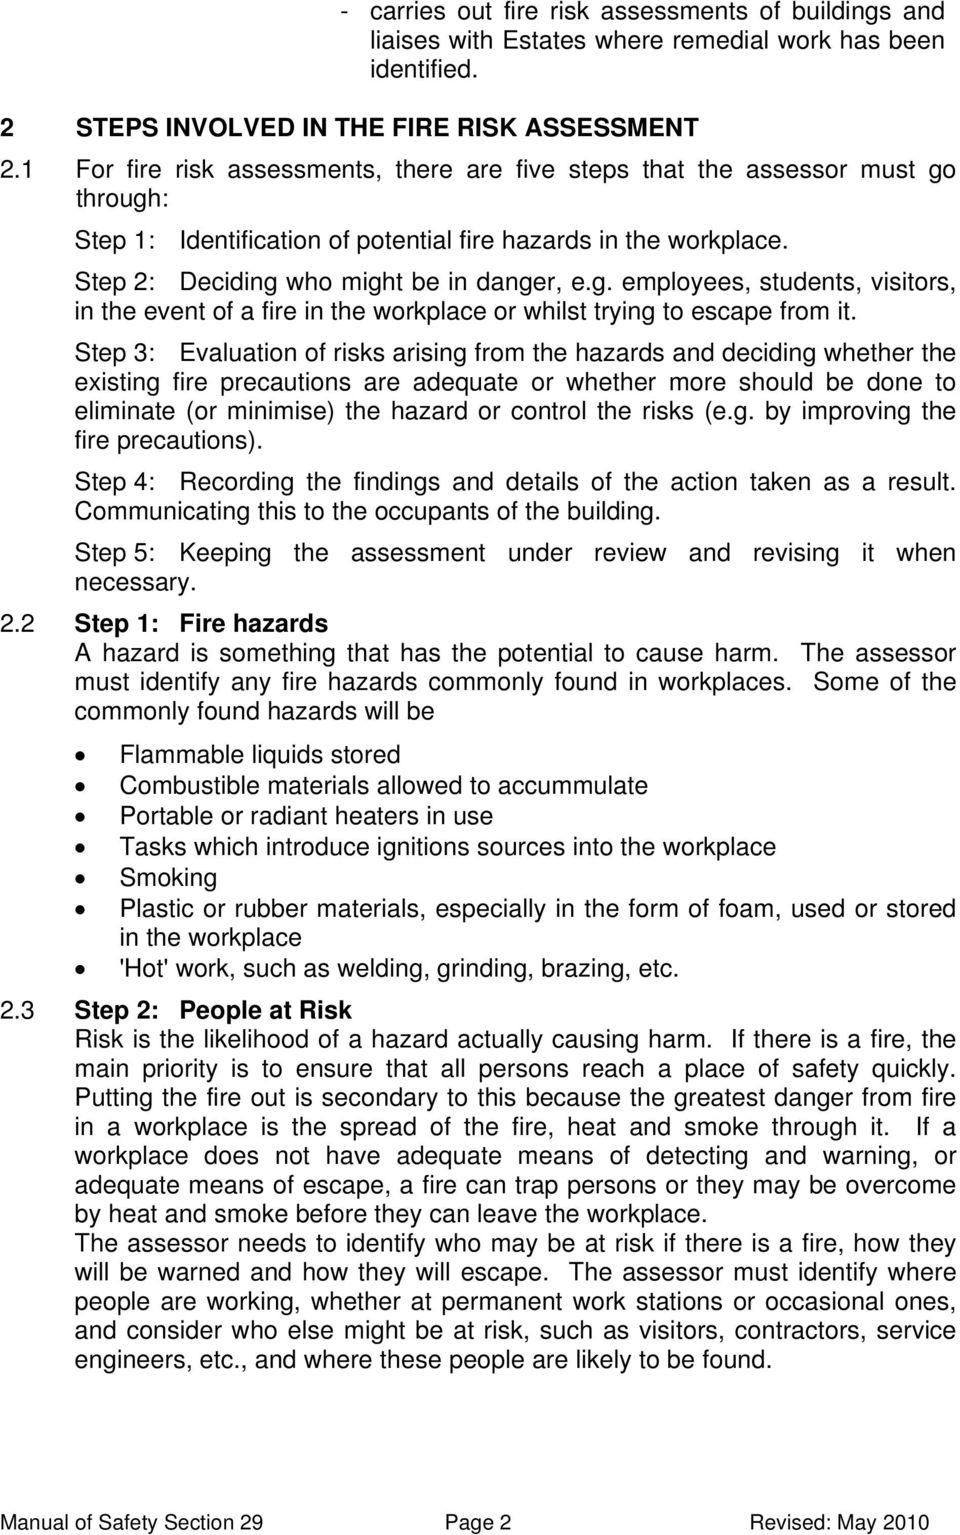 Step 3: Evaluation of risks arising from the hazards and deciding whether the existing fire precautions are adequate or whether more should be done to eliminate (or minimise) the hazard or control